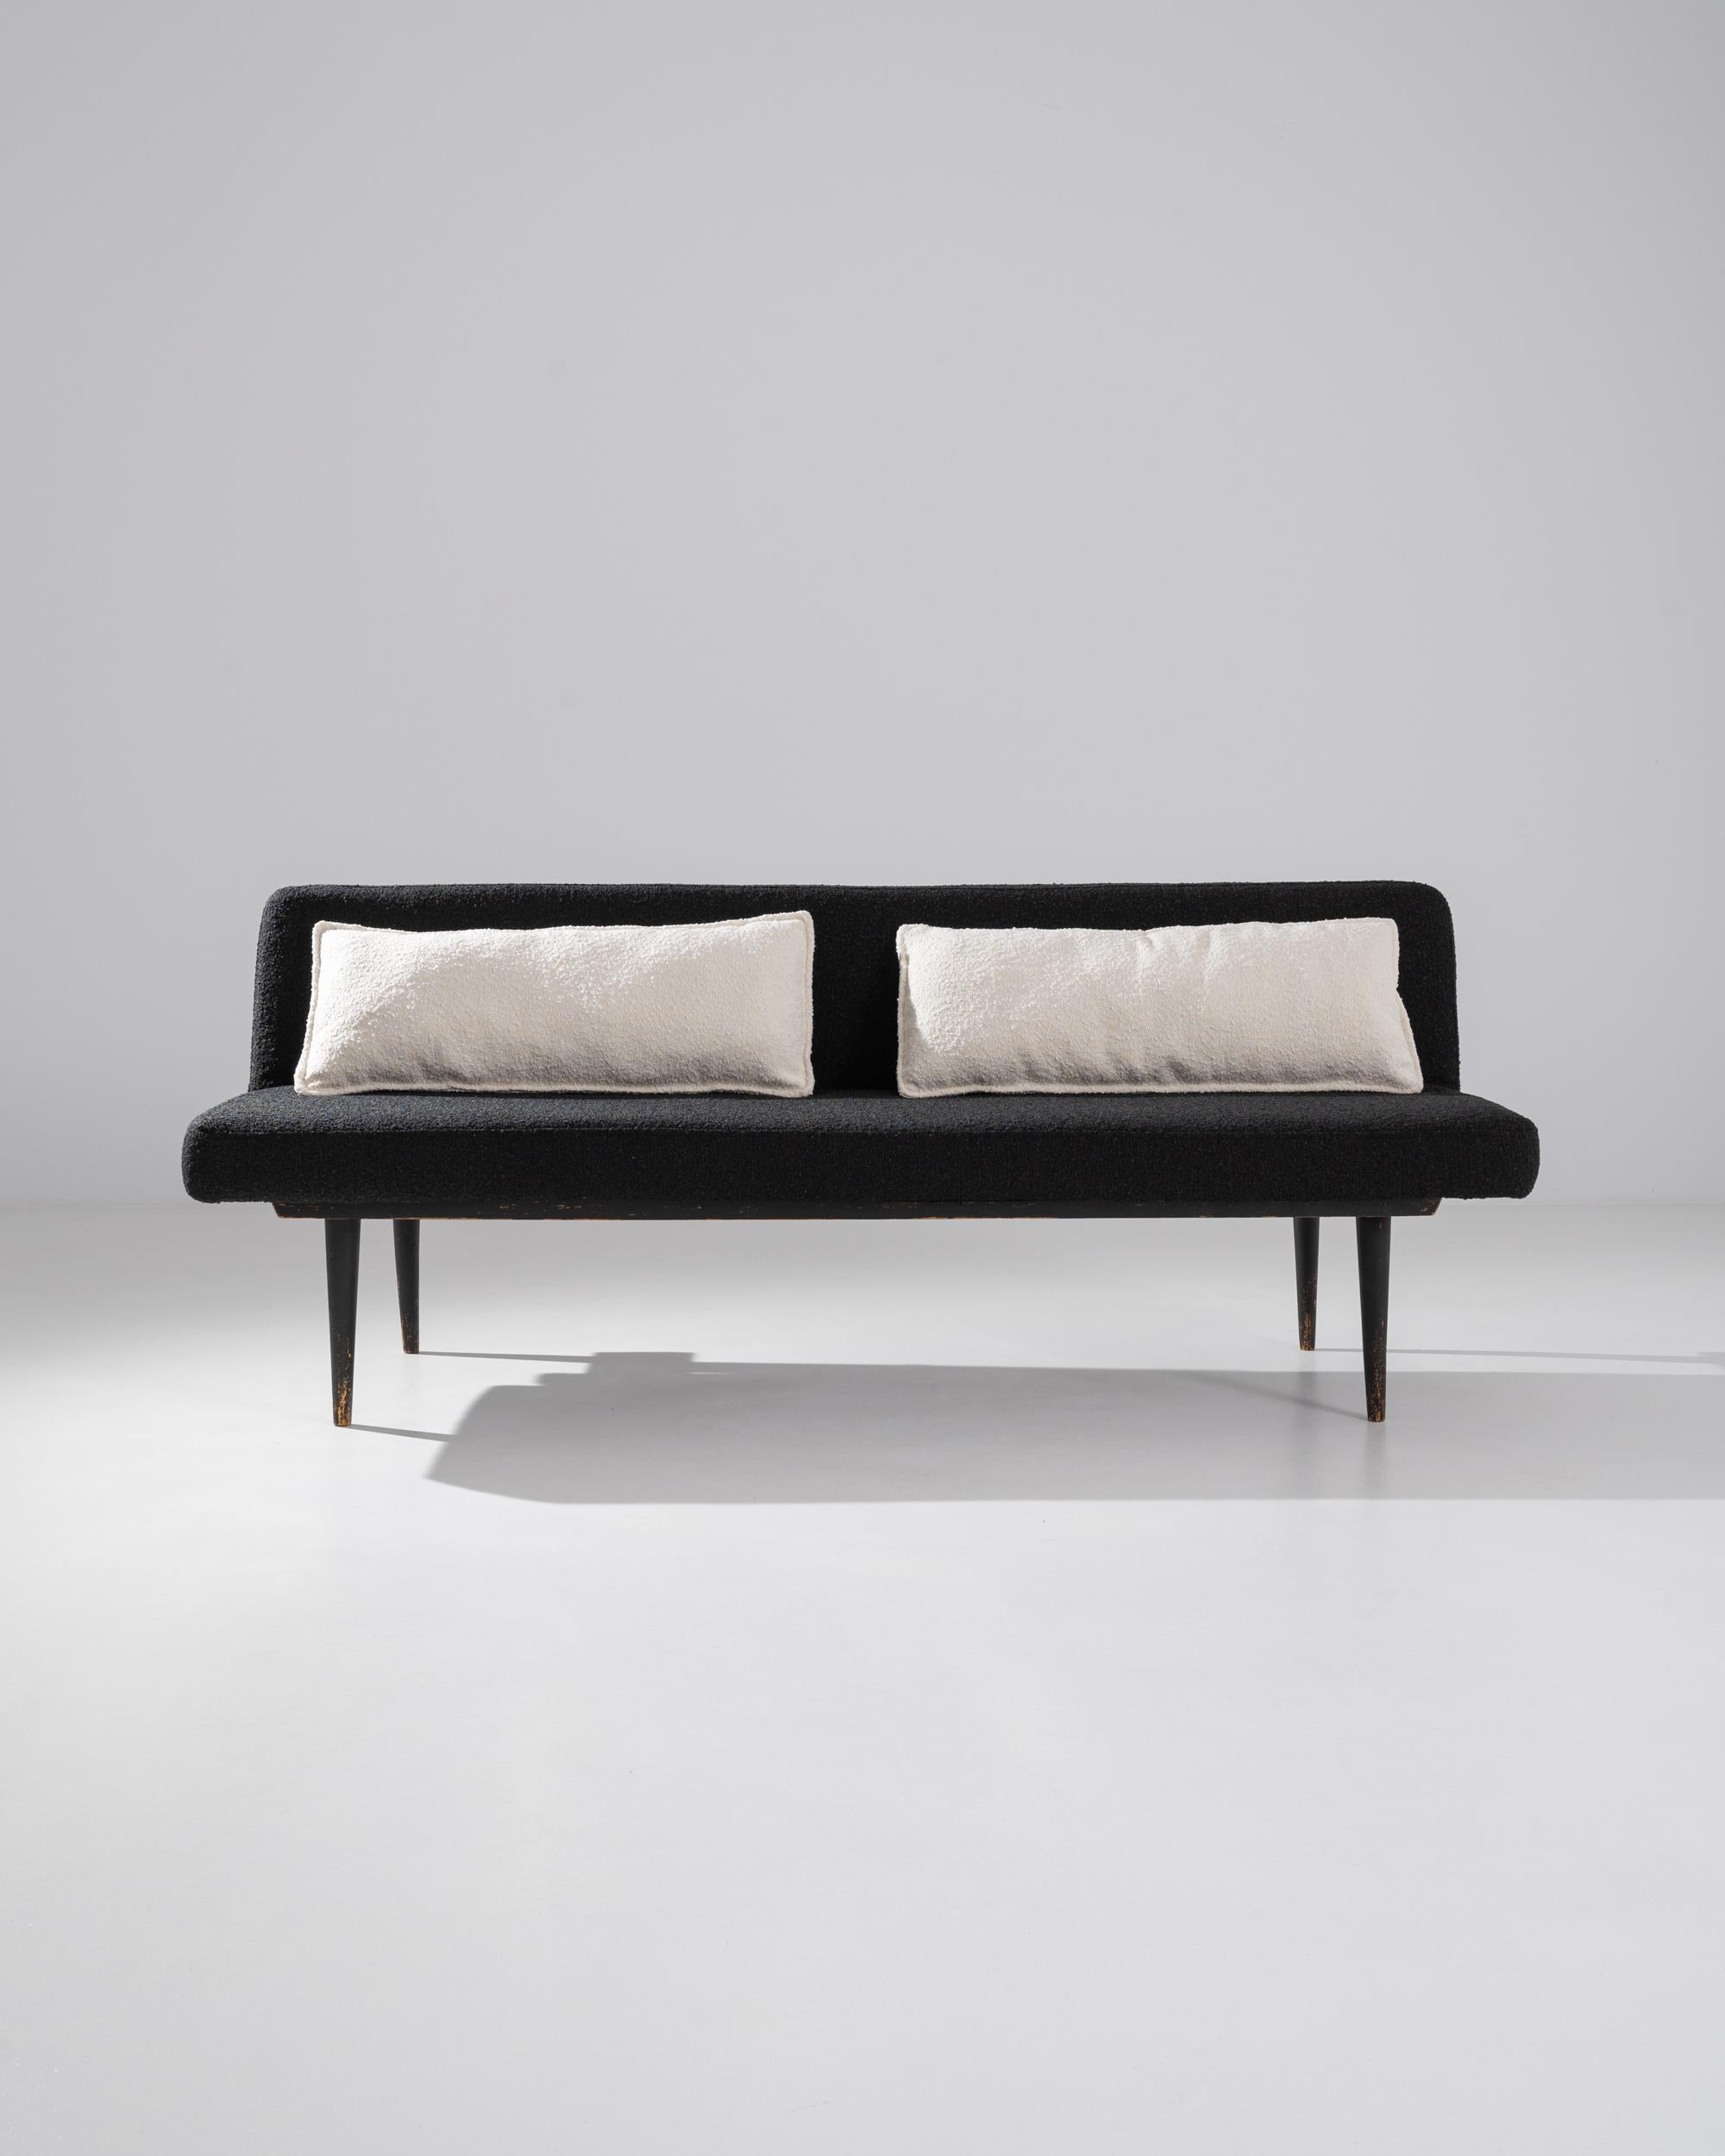 Both practical and impeccably stylish, this vintage sofa bed is a minimalist gem. Made in Central Europe in the 20th century, the form is pared back to its essentials for a graphic silhouette. Slender wooden legs taper to a sharp point; the rounded